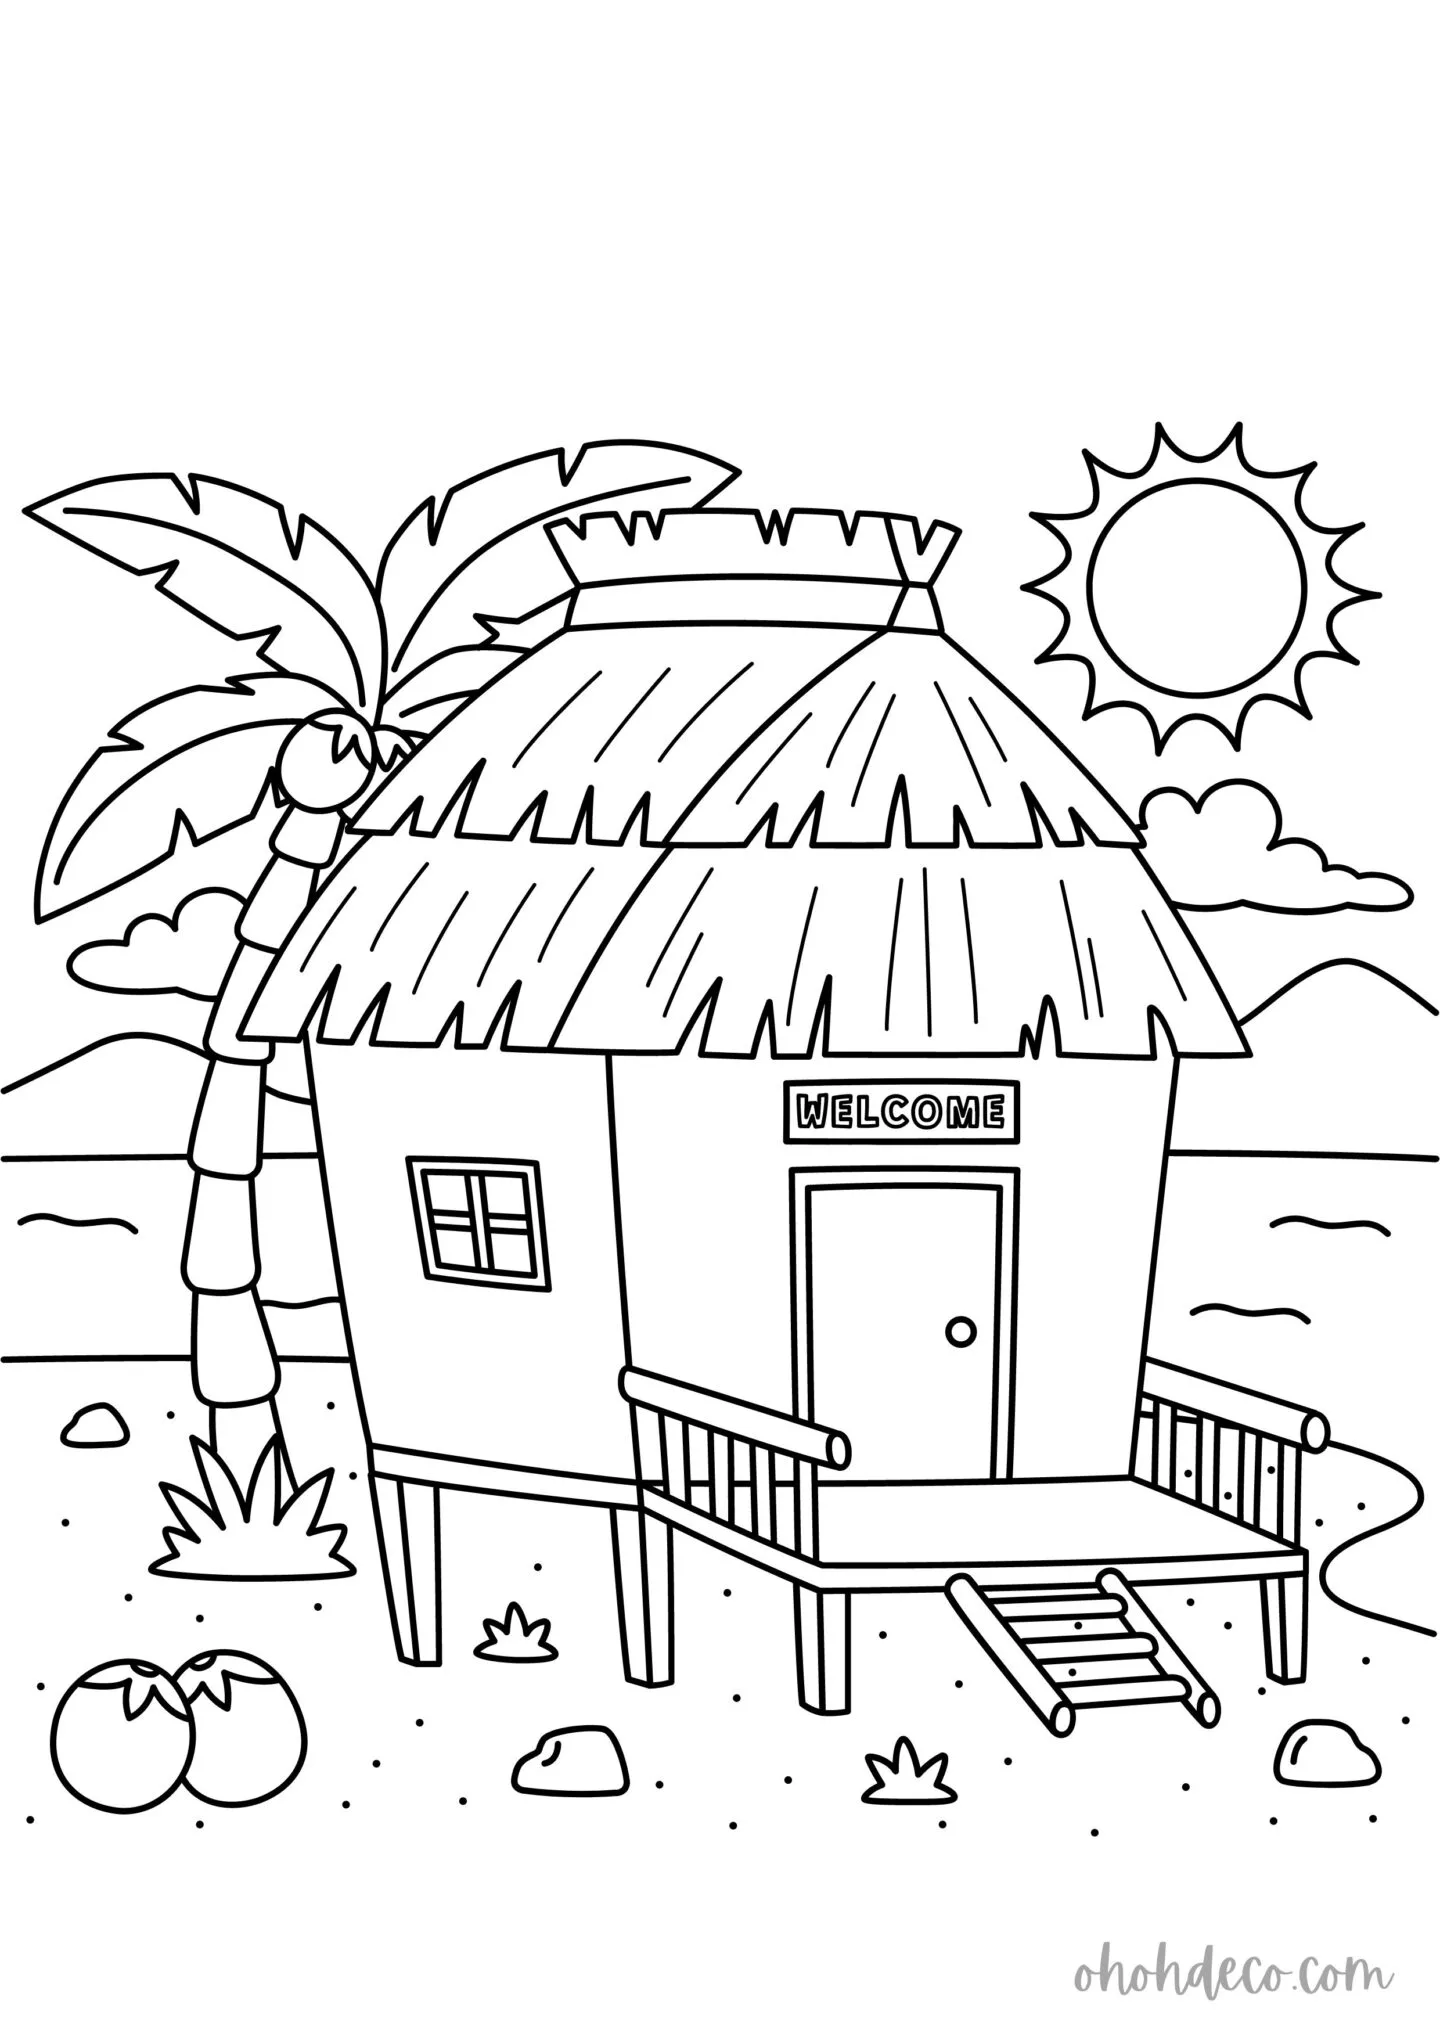 hut coloring page